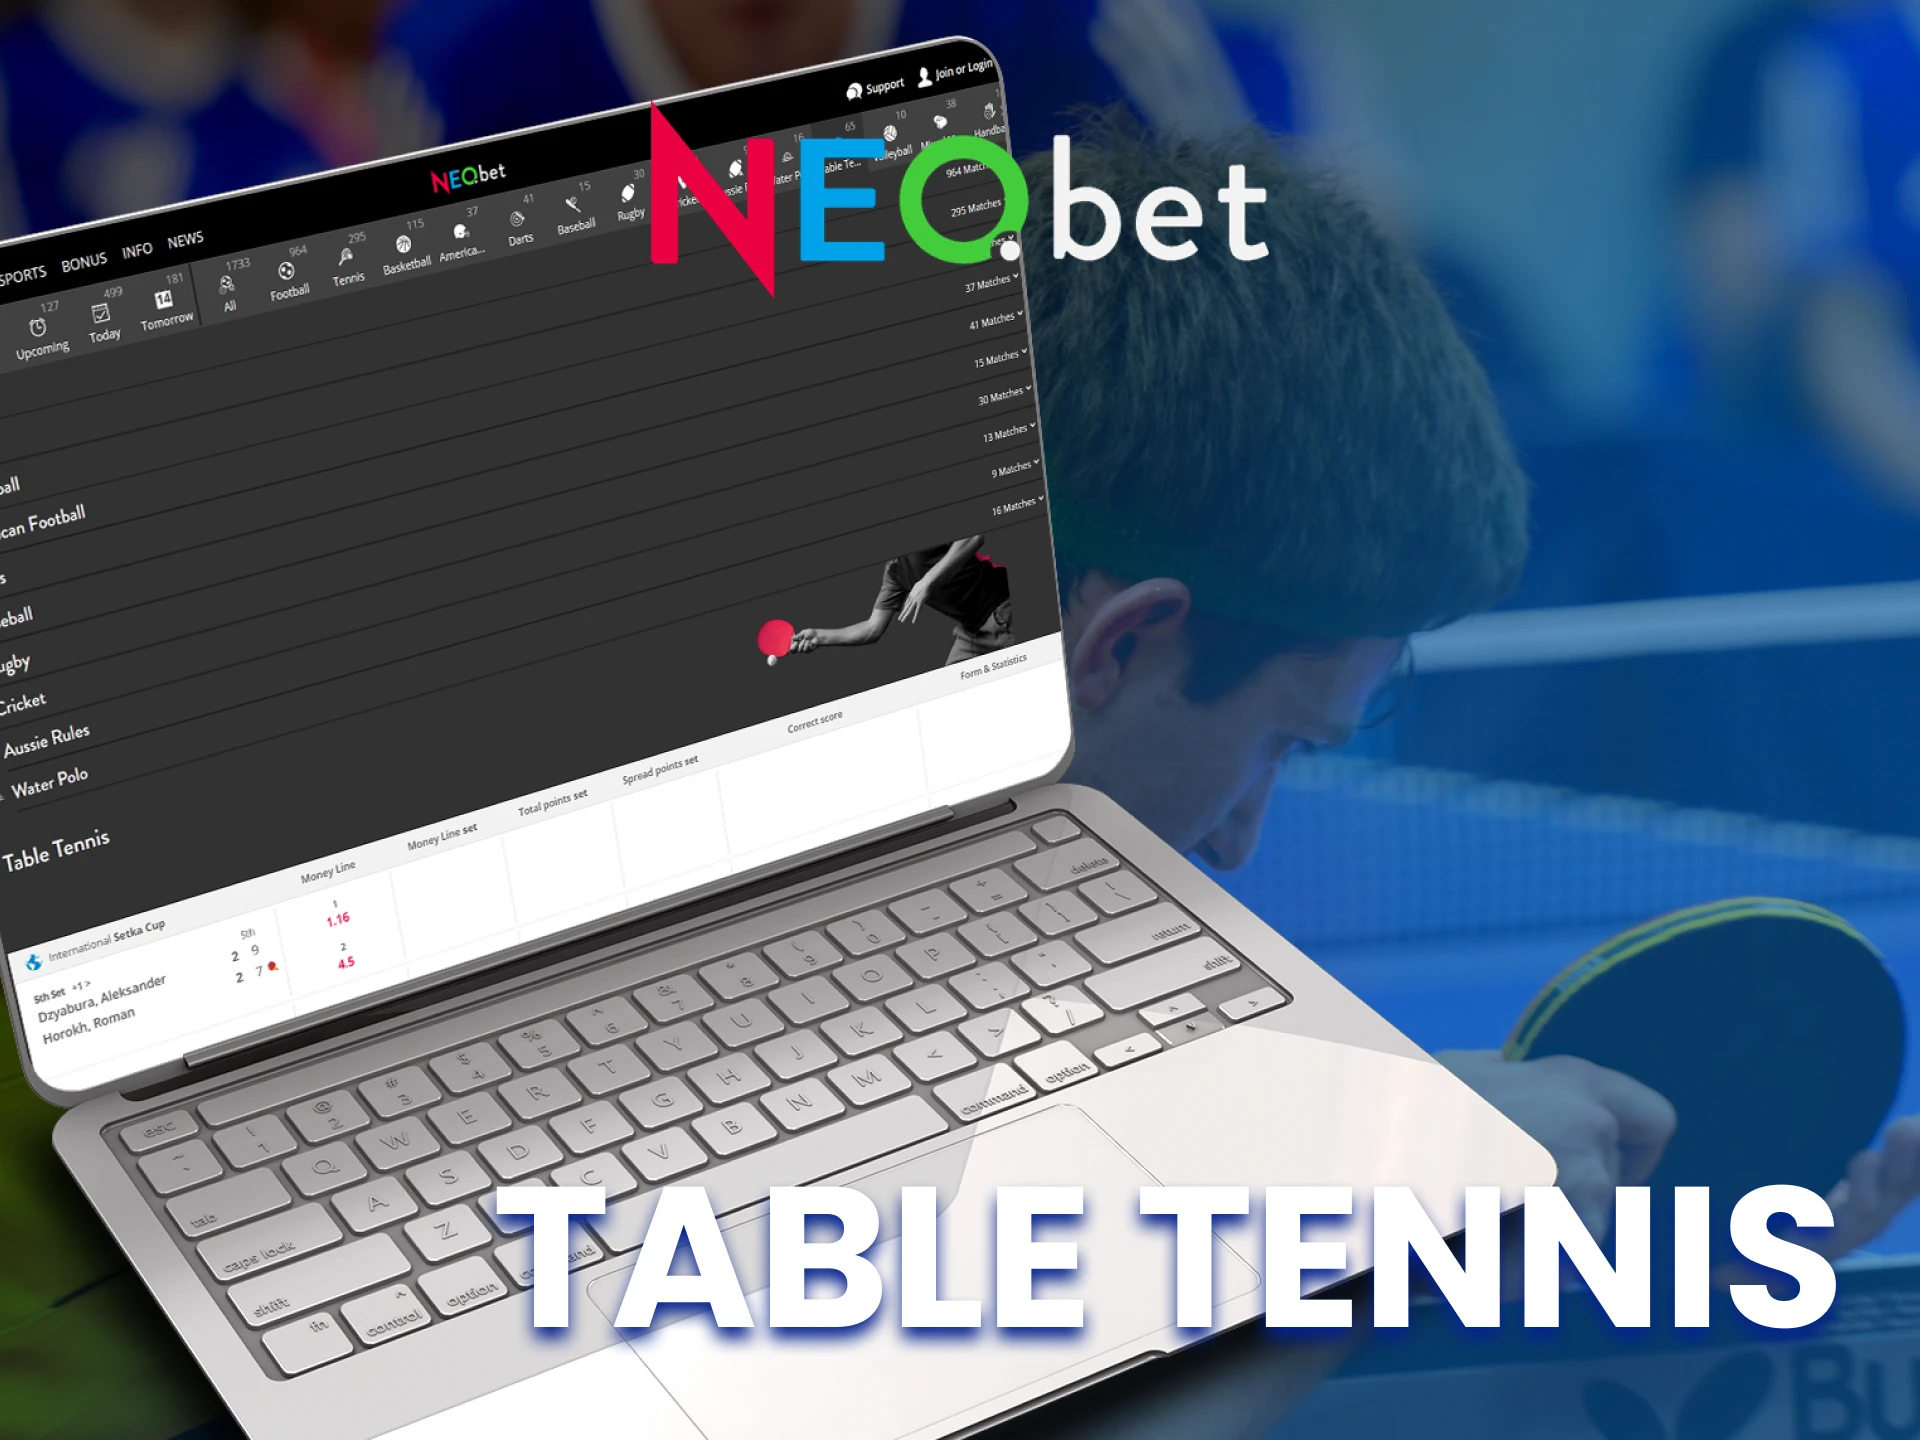 With NEO.bet, bet on a table tennis match.